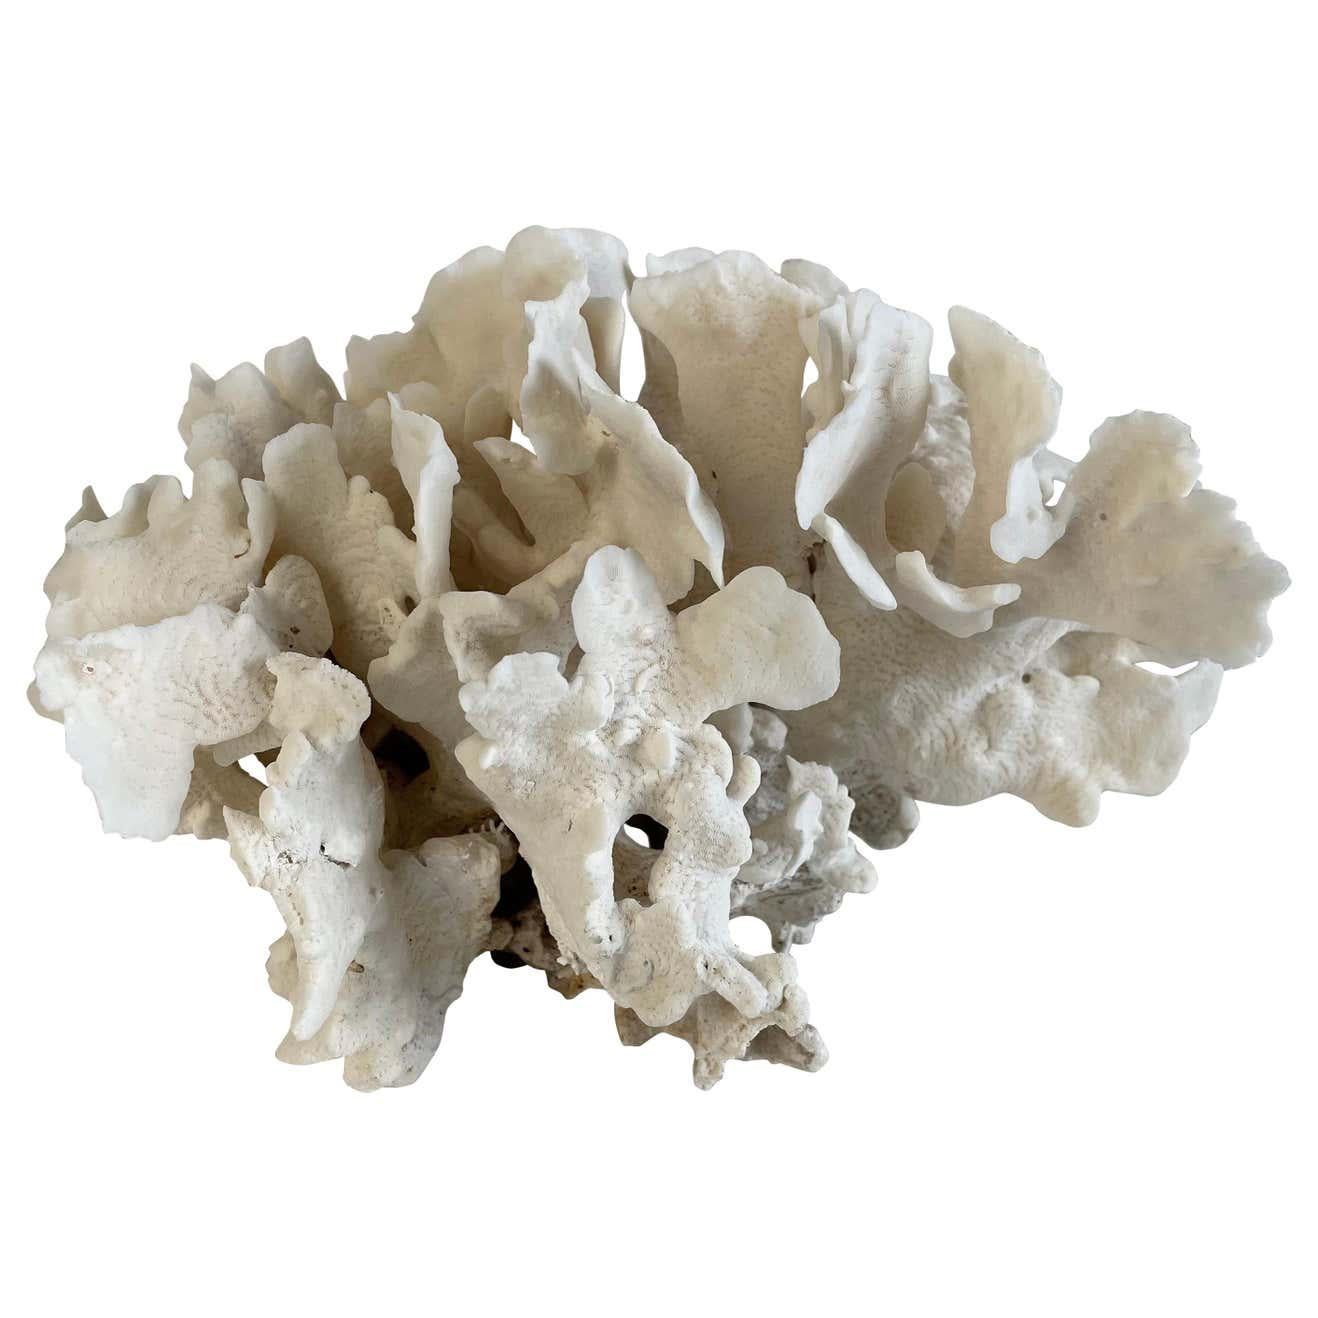 White Lace Cup Coral